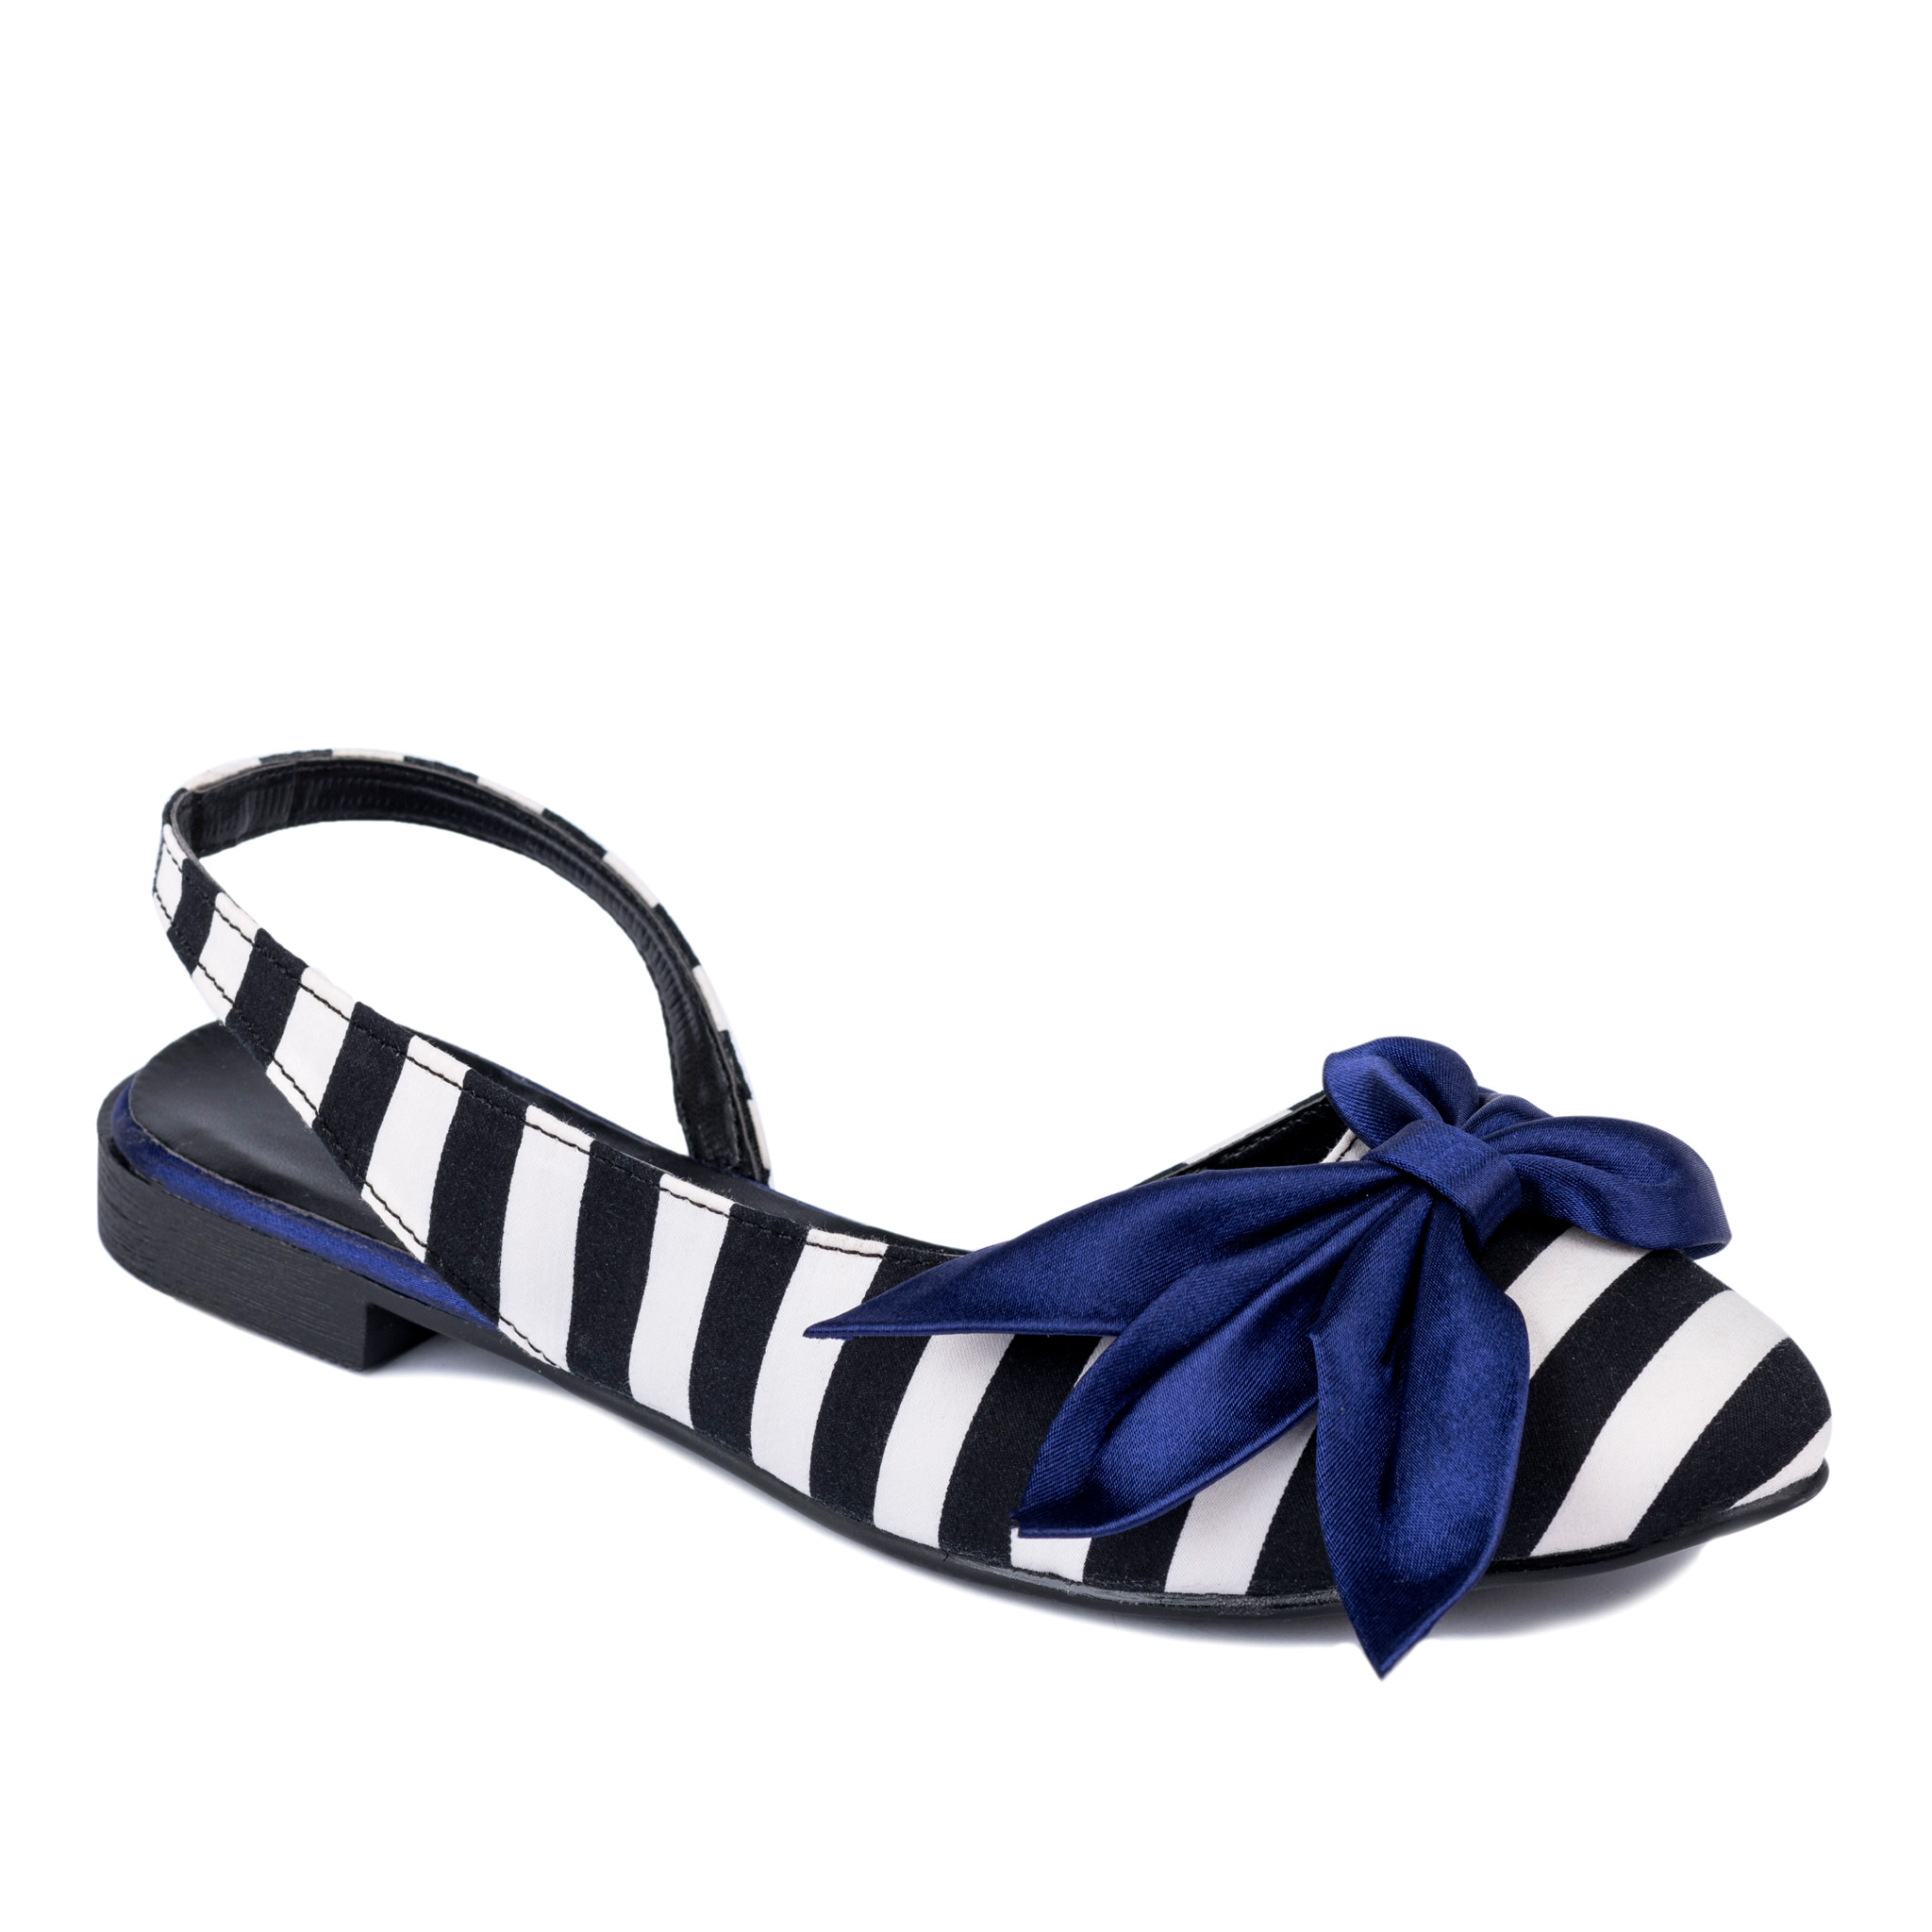 STRIPED FLATS WITH PURPLE BOW - BLACK/WHITE